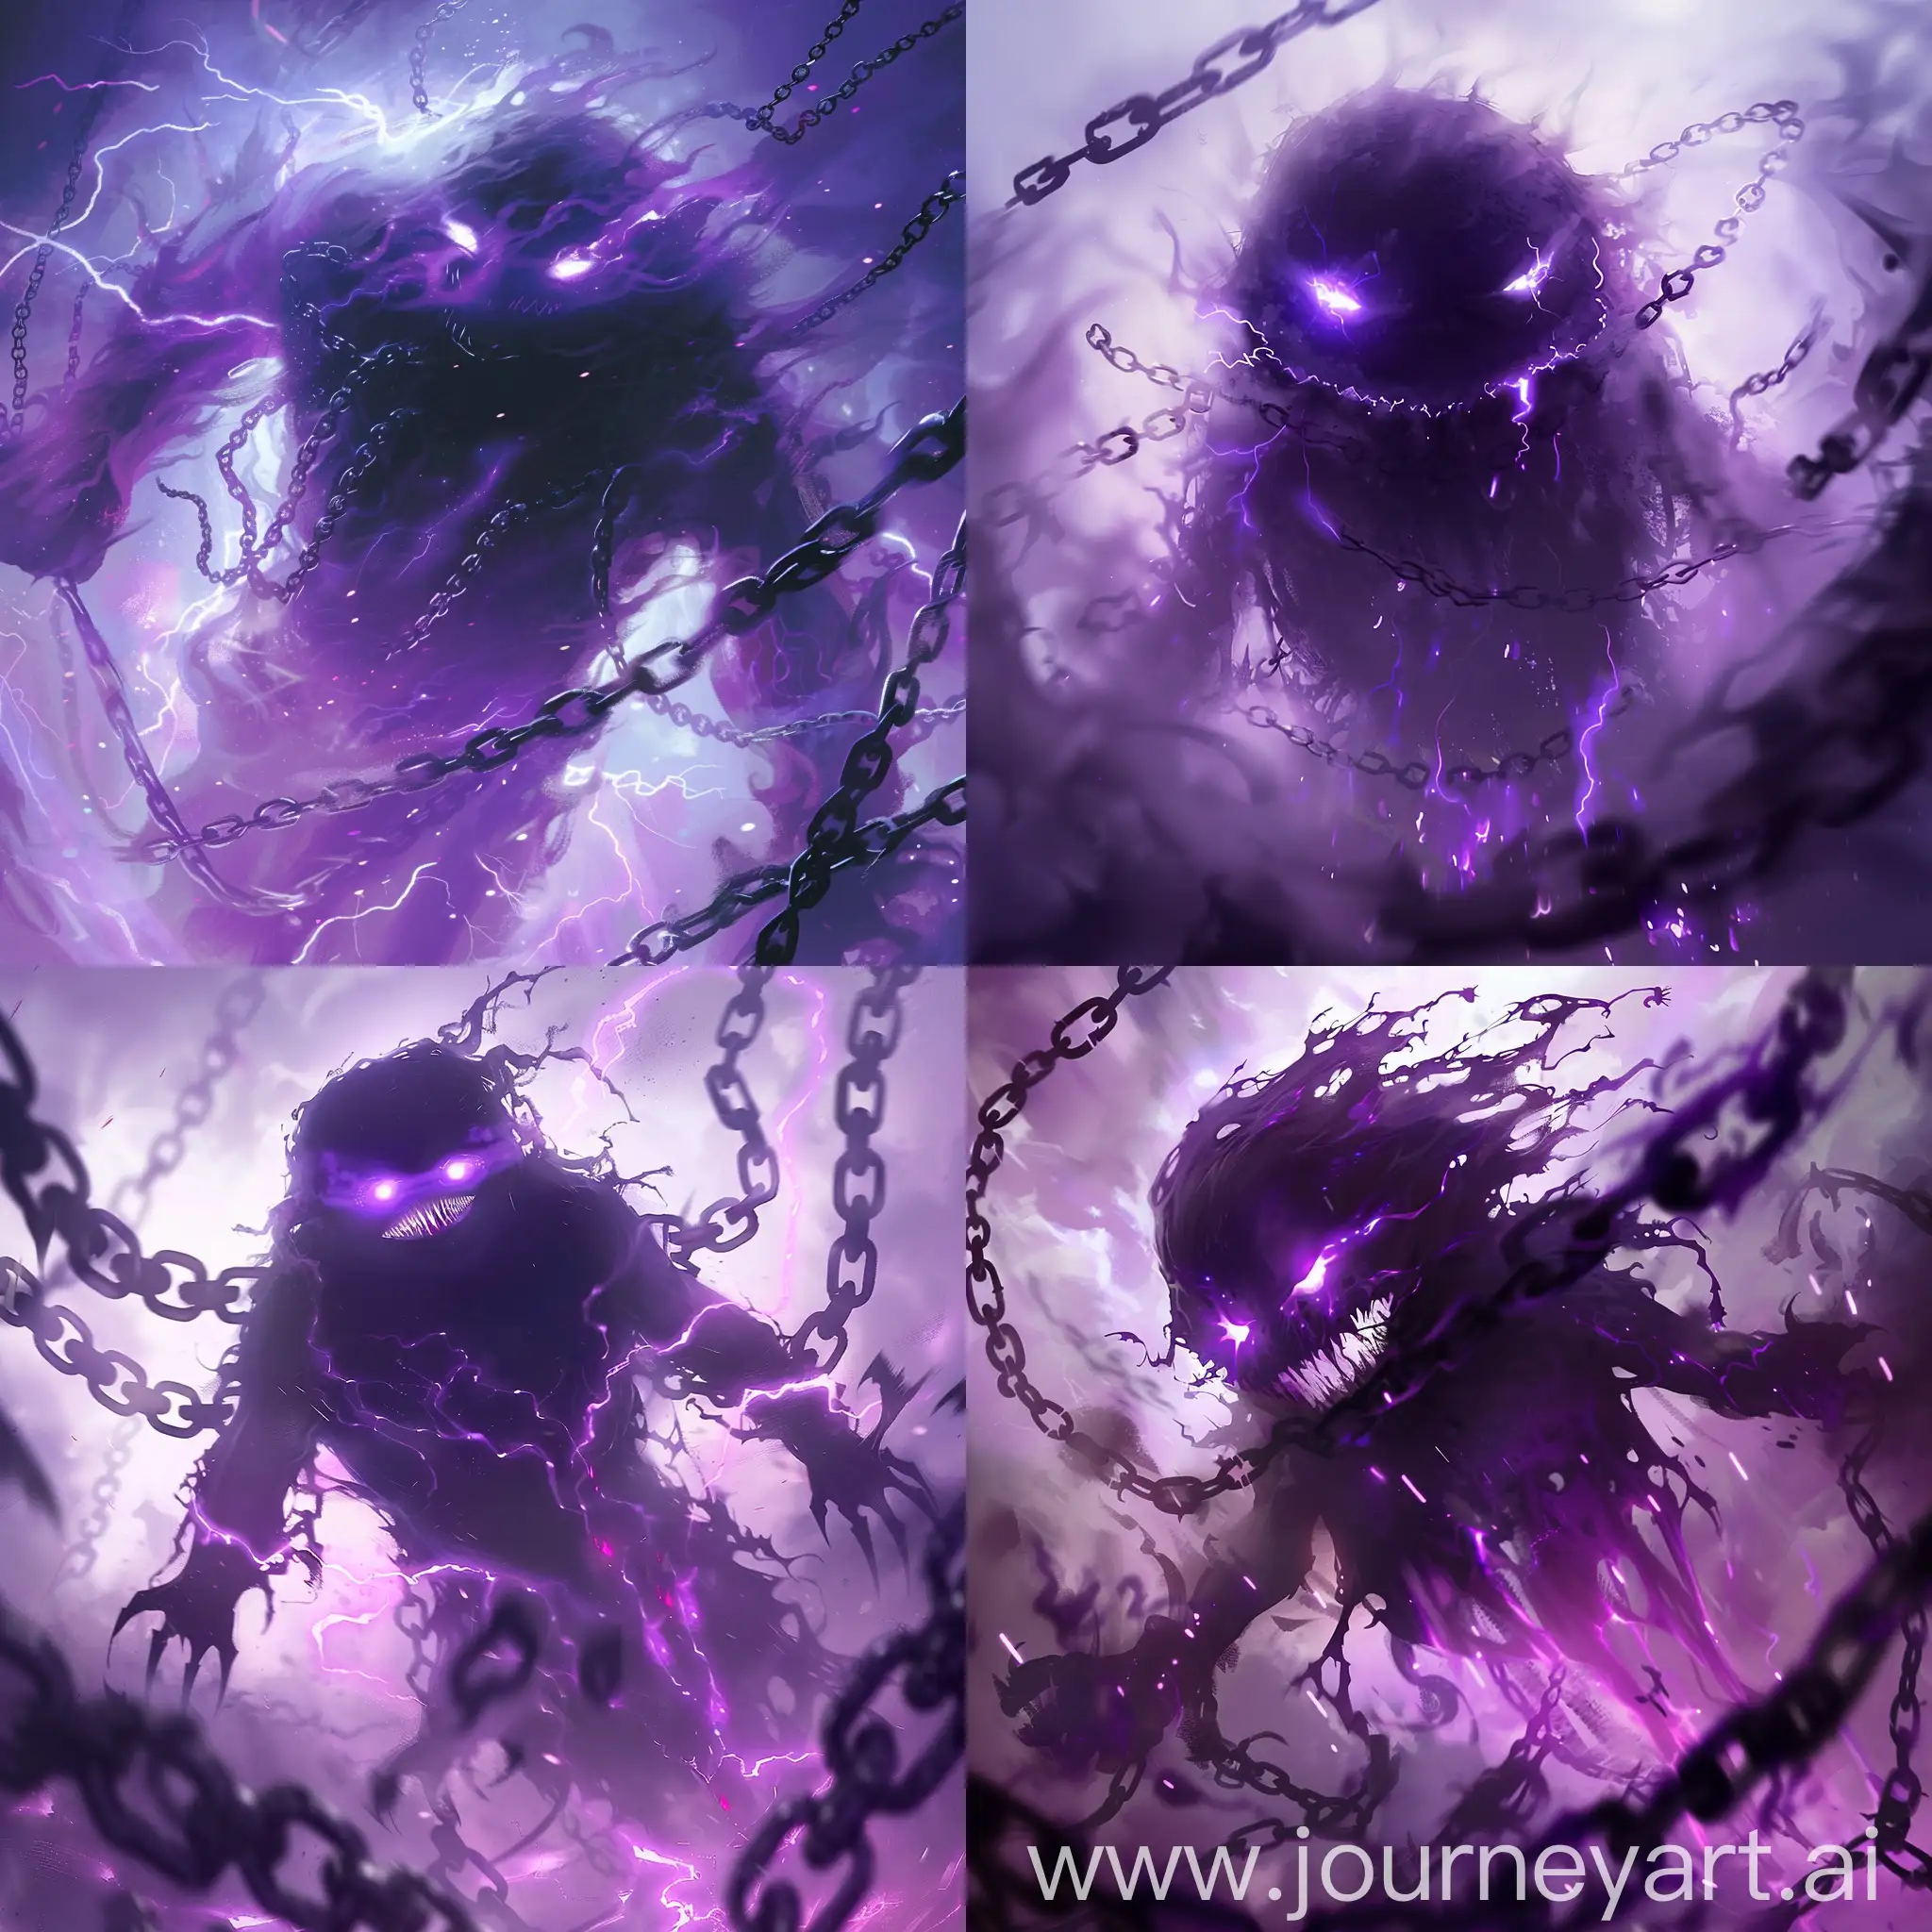 Menacing-Shadow-Monster-with-Glowing-Purple-Eyes-and-Chains